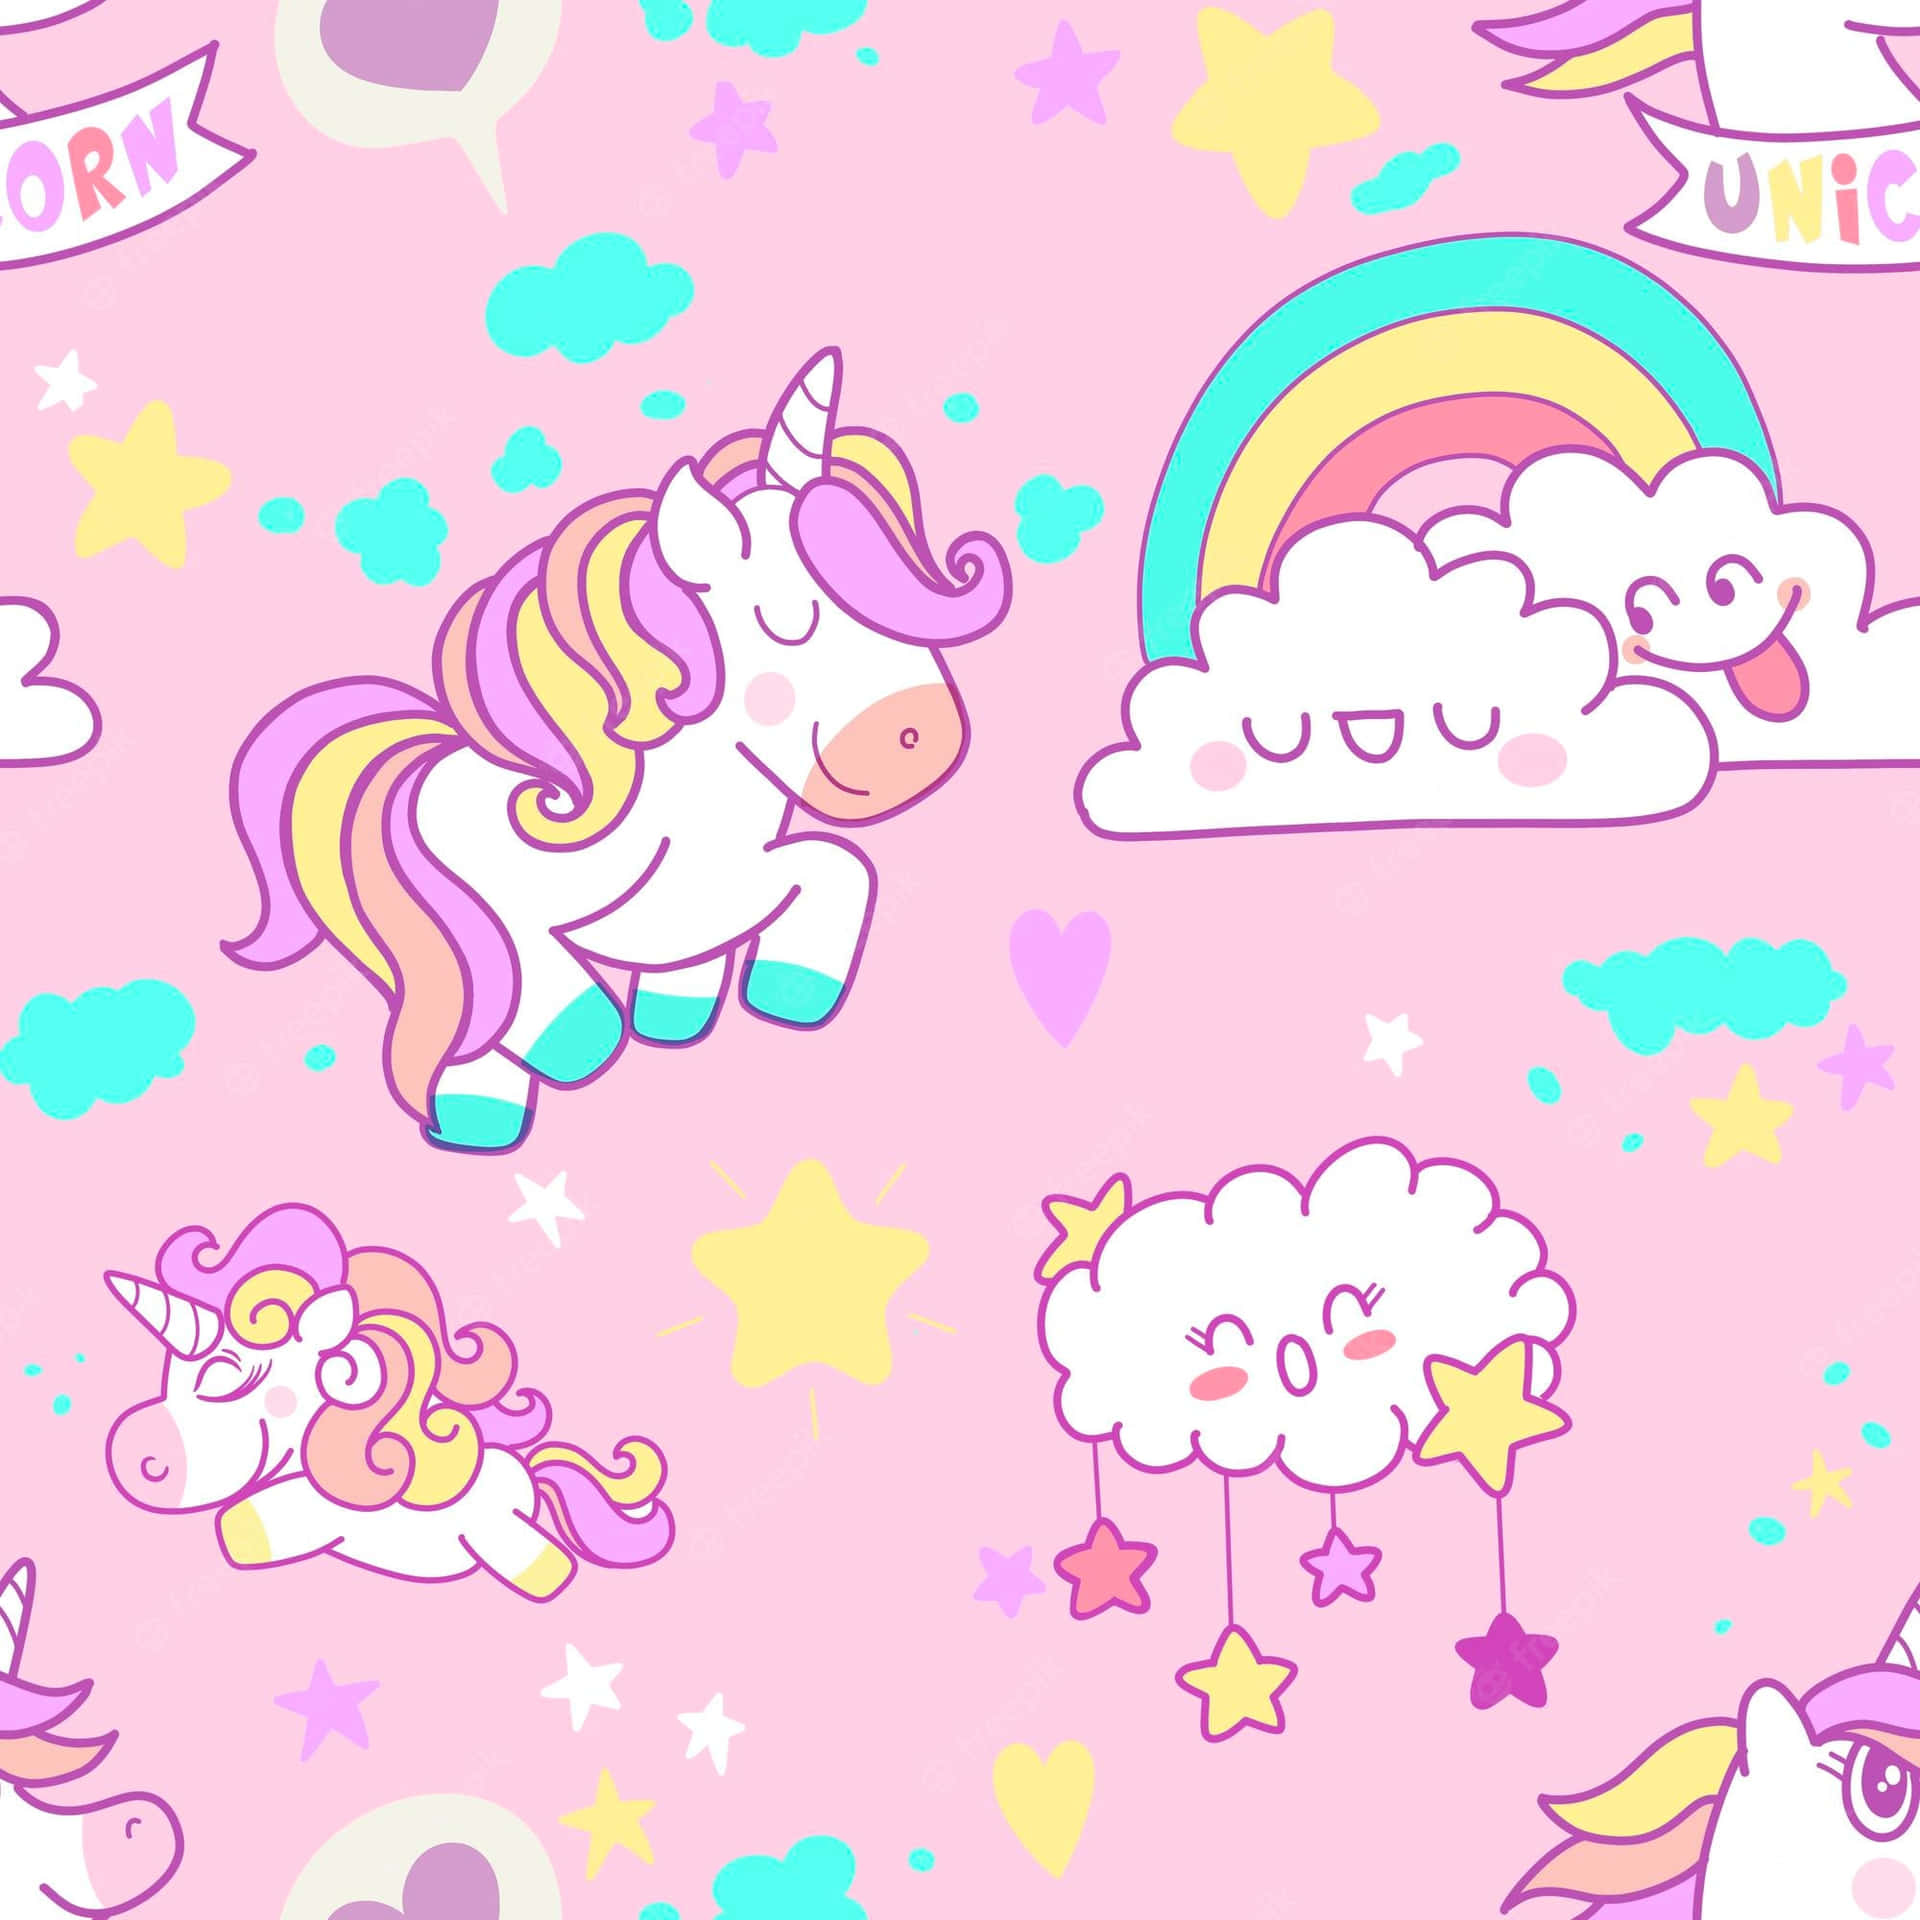 Travel to a colorful universe with a beautiful pastel unicorn